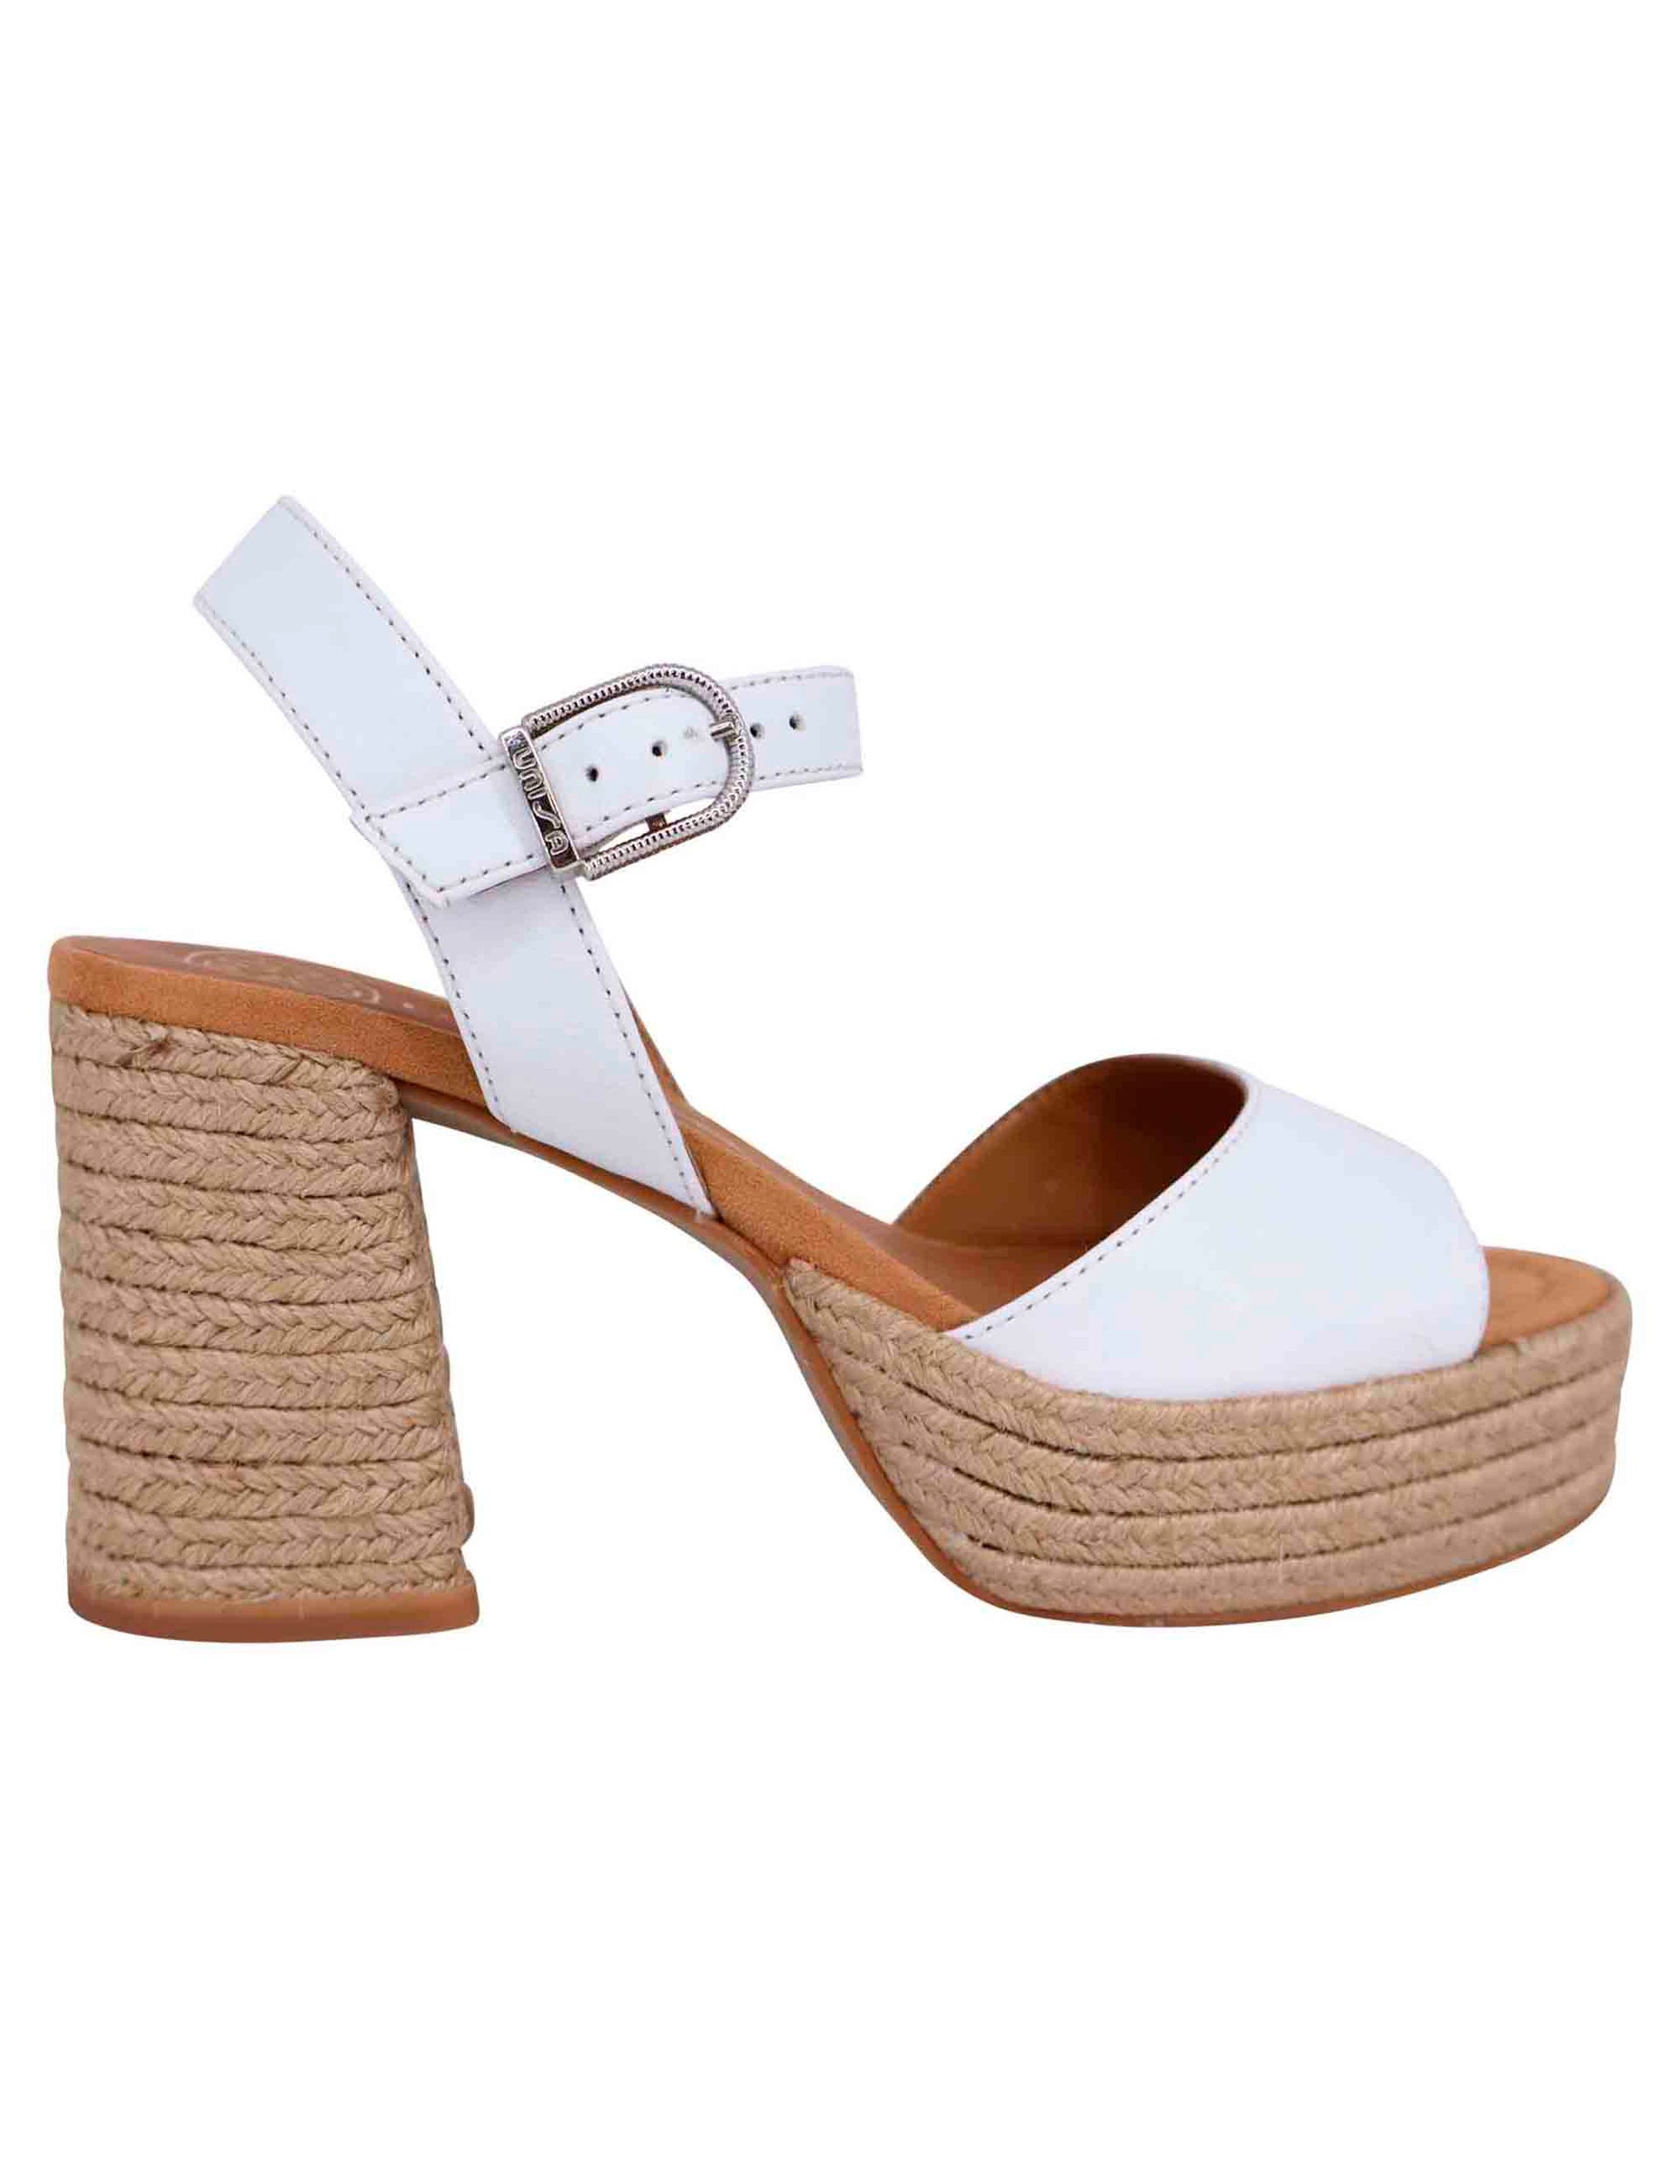 Women's white leather sandals with high heel and ankle strap